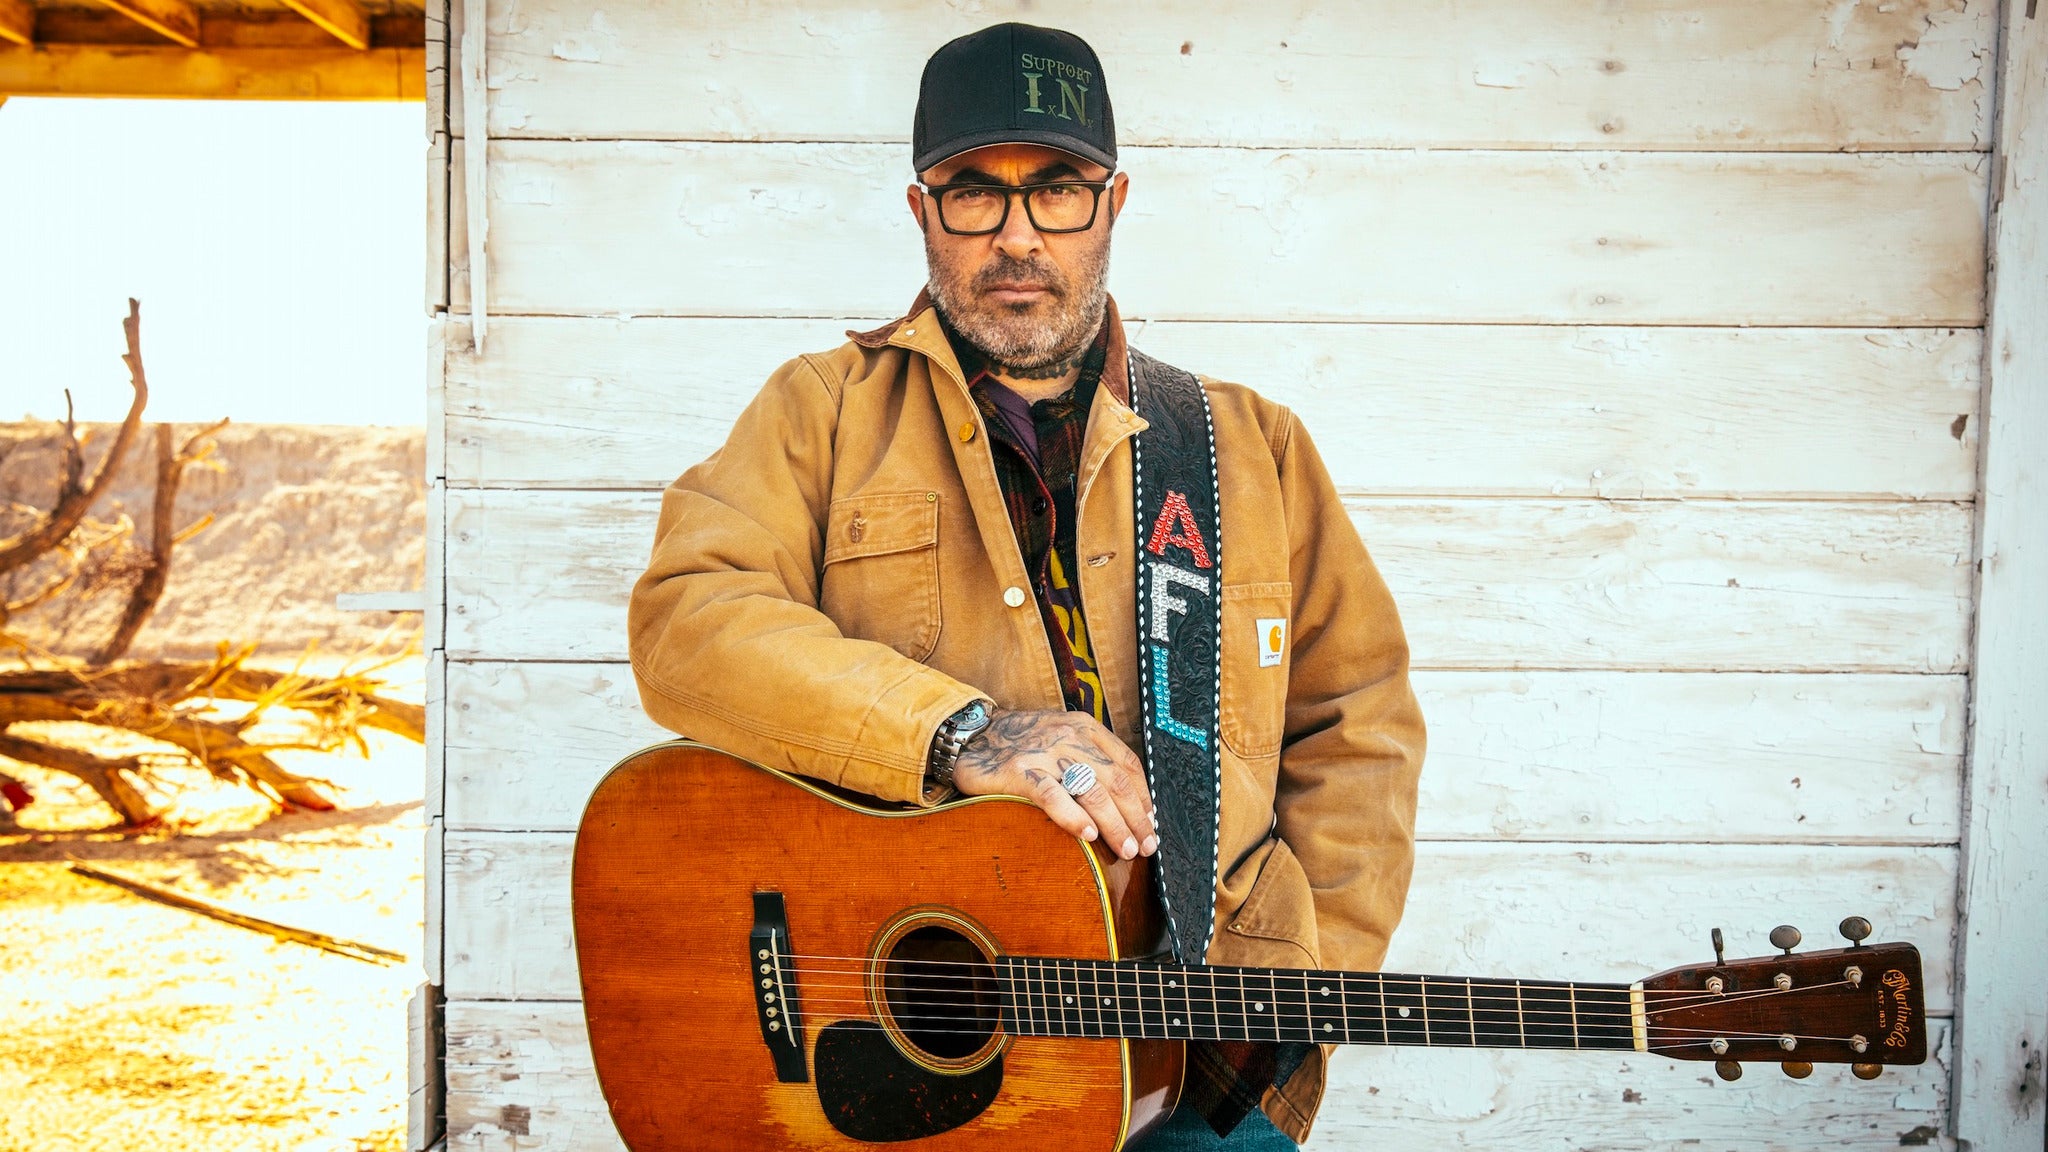 HD desktop wallpaper featuring a man with a guitar, wearing a brown jacket, cap, and glasses, posing against a rustic background.